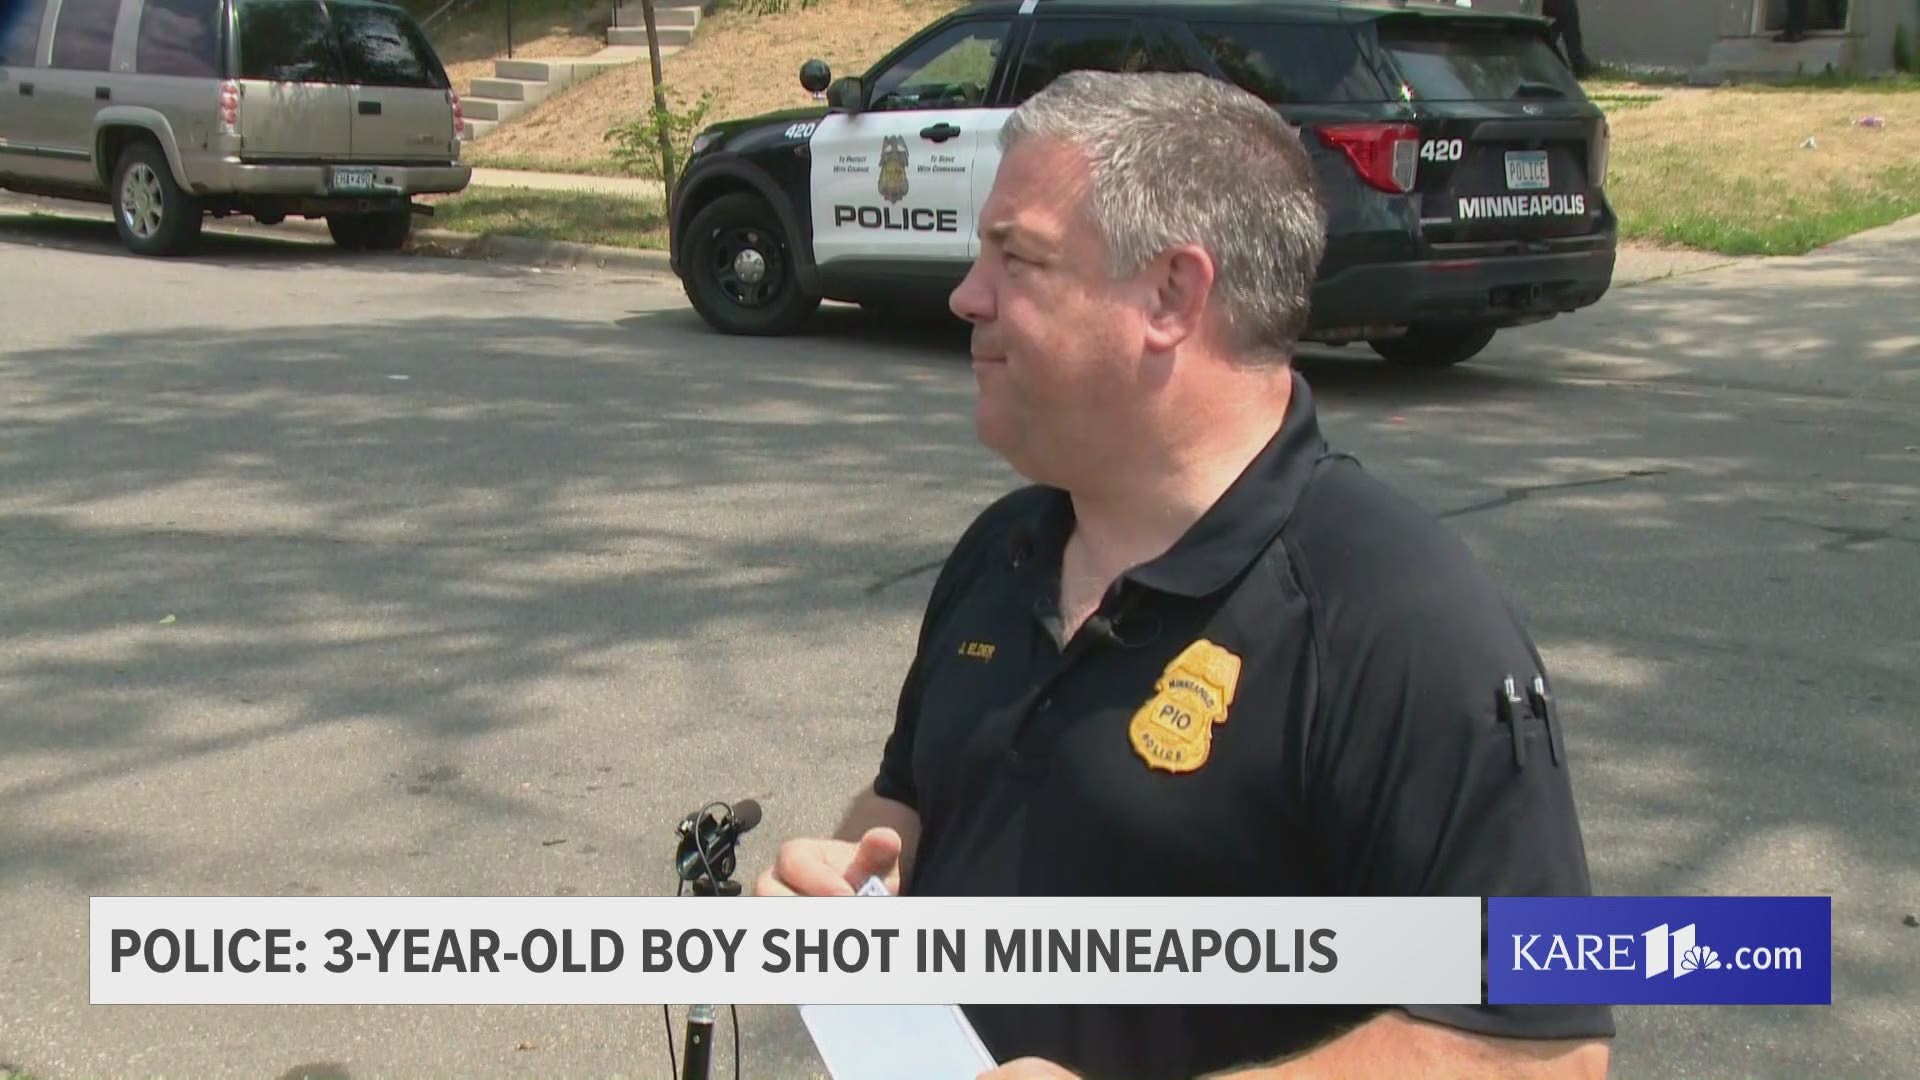 According to Minneapolis police, the child was taken to HCMC with a "very serious gunshot wound."